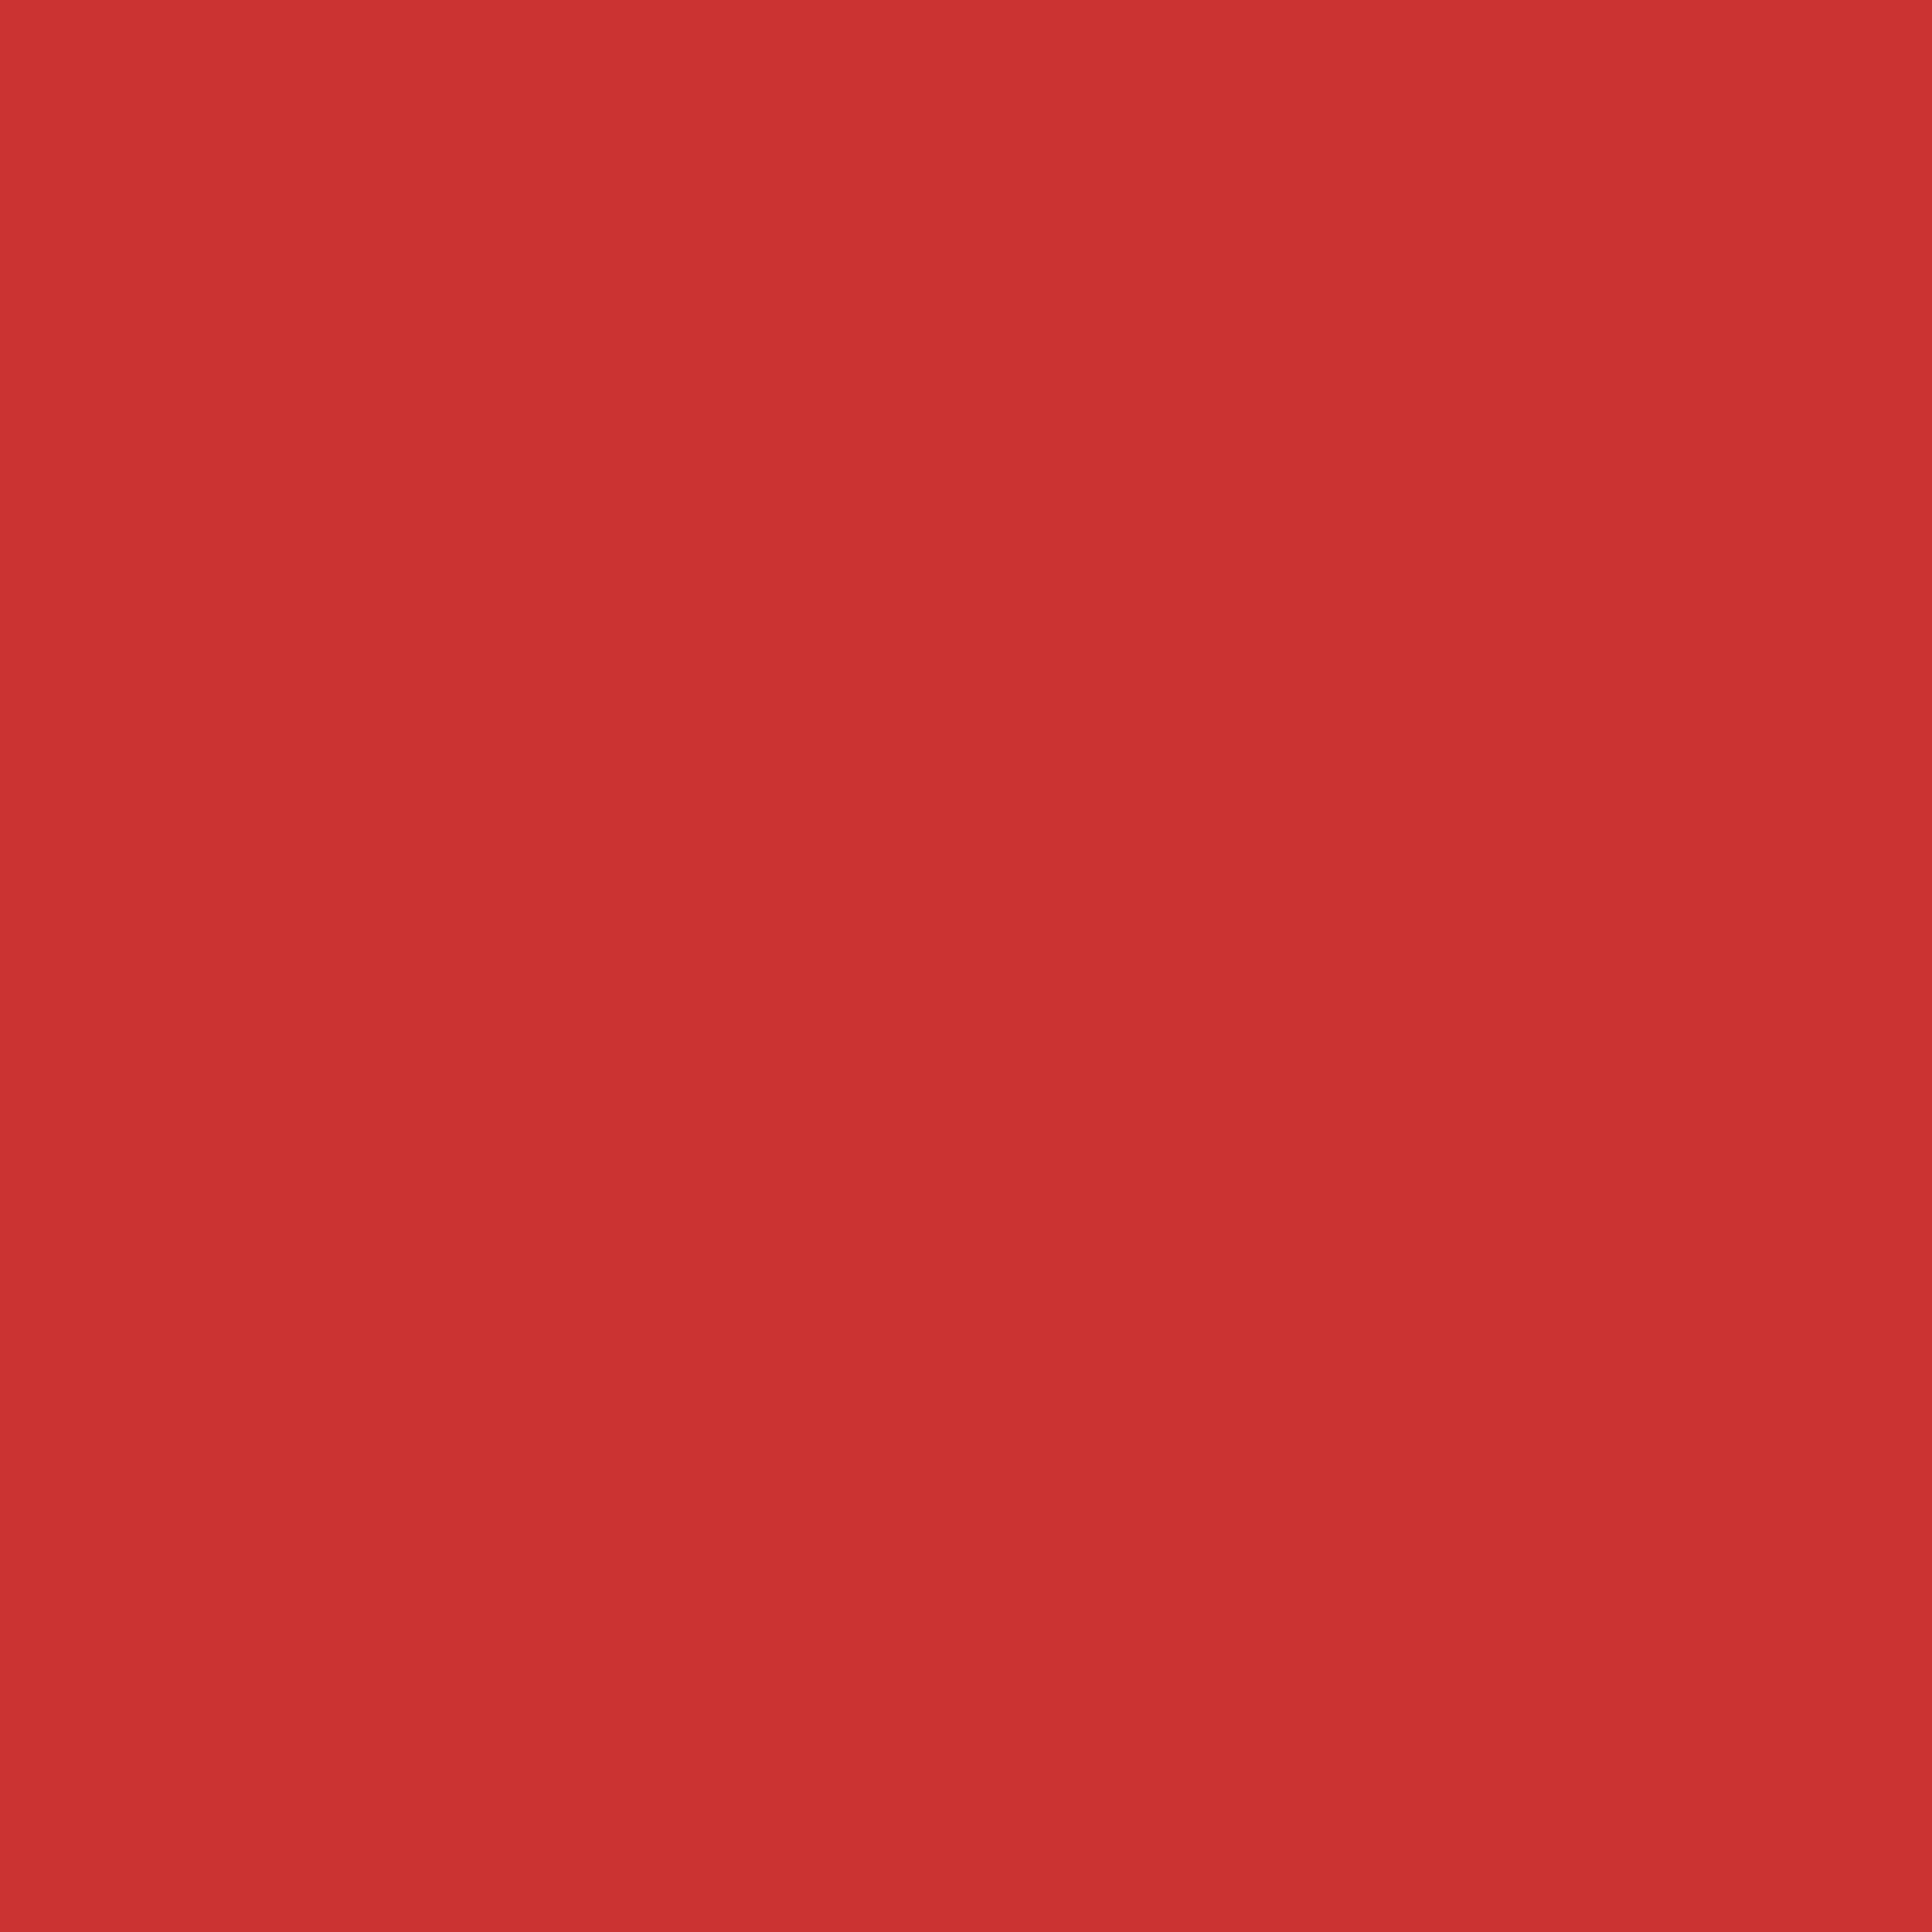 2732x2732 Persian Red Solid Color Background